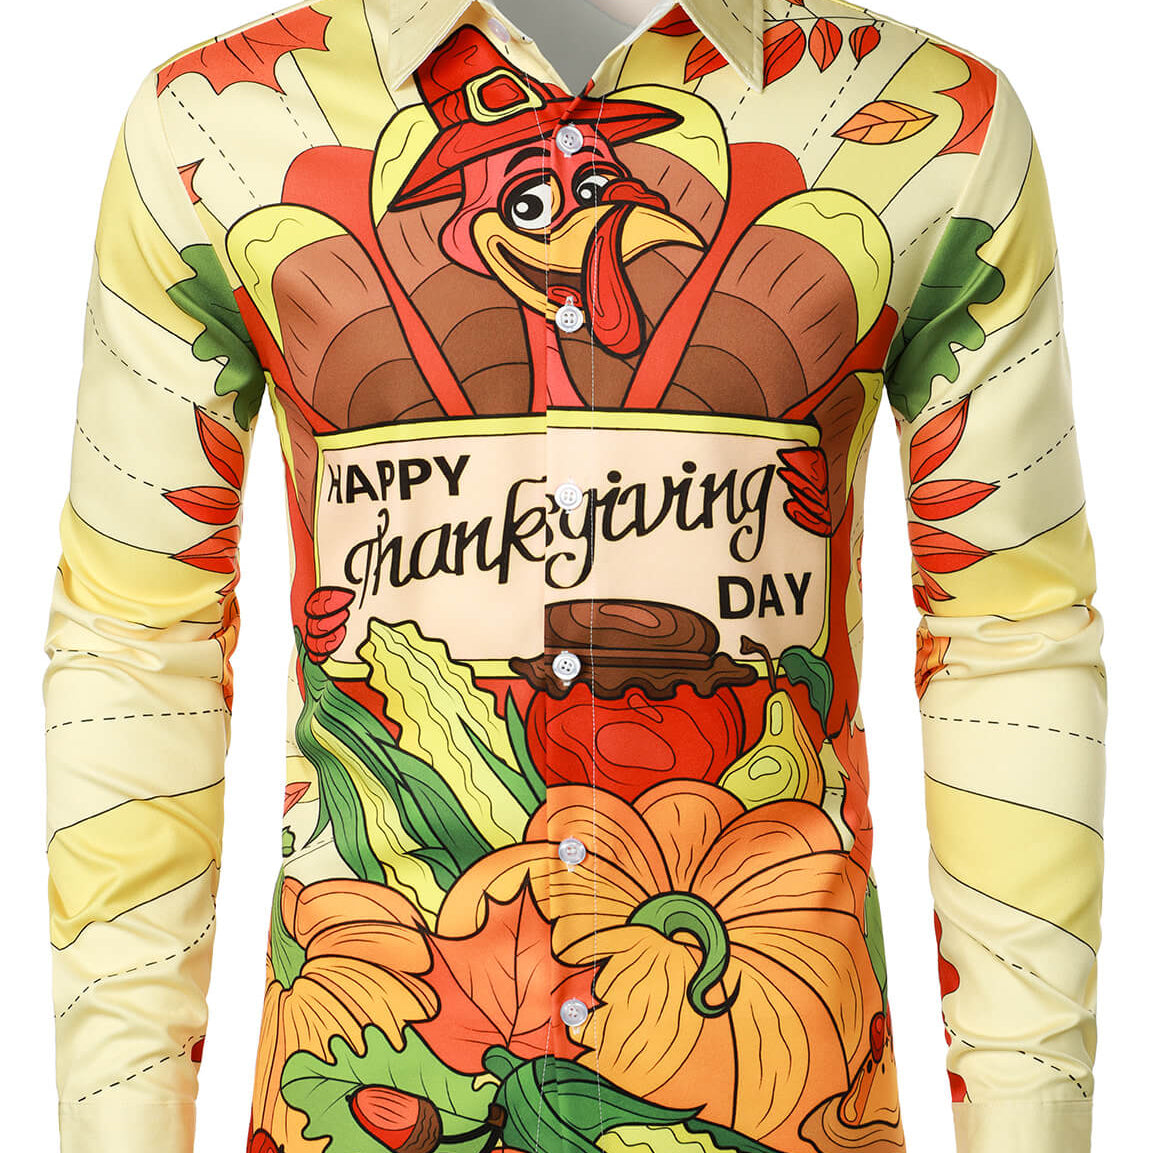 Men's Holiday Happy Thanksgiving Day Party Cute Cartoon Turkey Day Button Long Sleeve Shirt